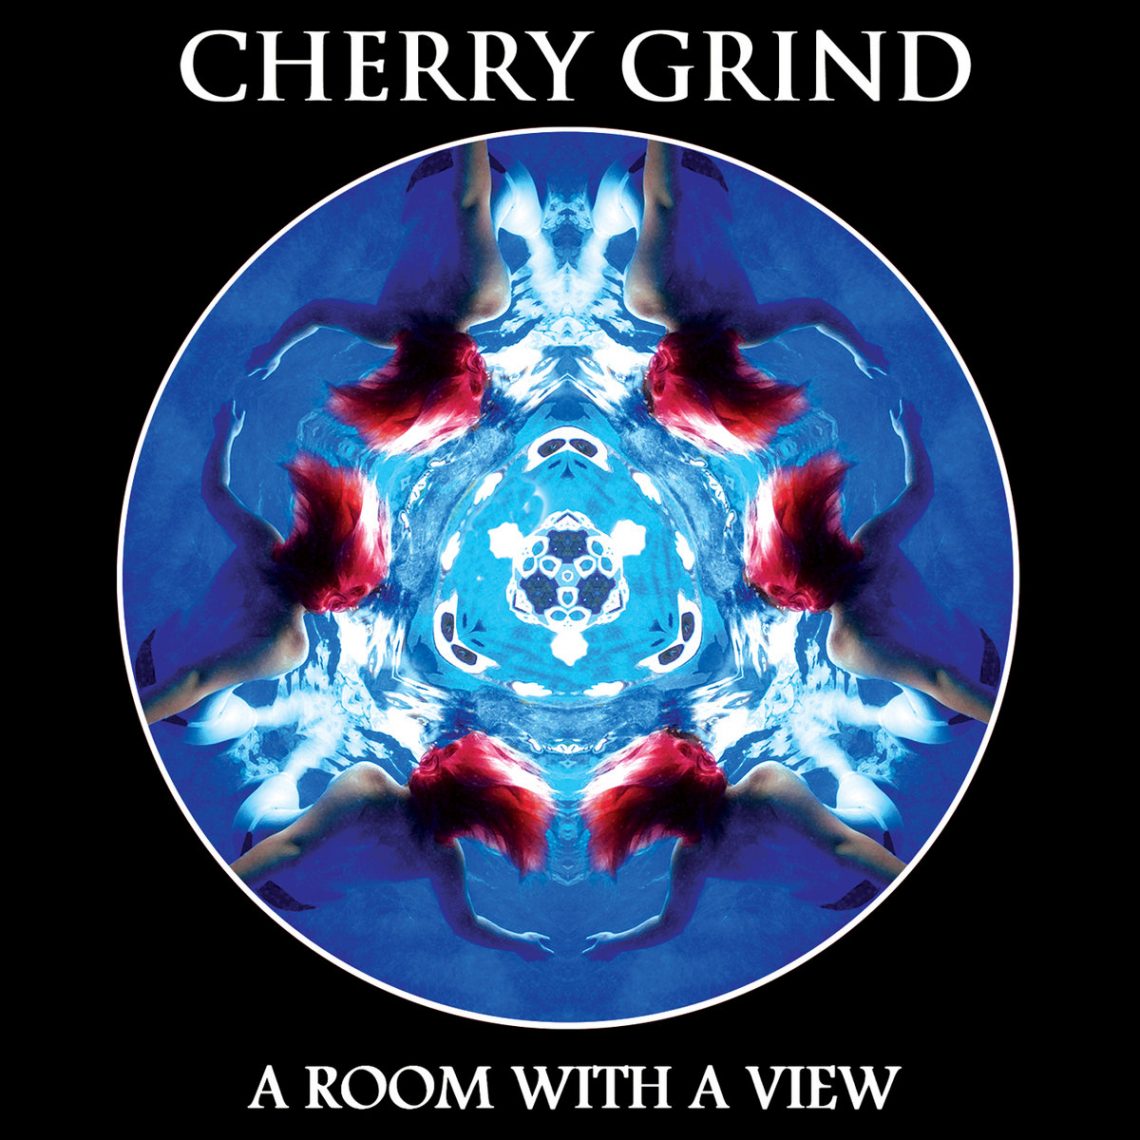 CHERRY GRIND Announce ‘A Room With A View’ debut album UK Tour